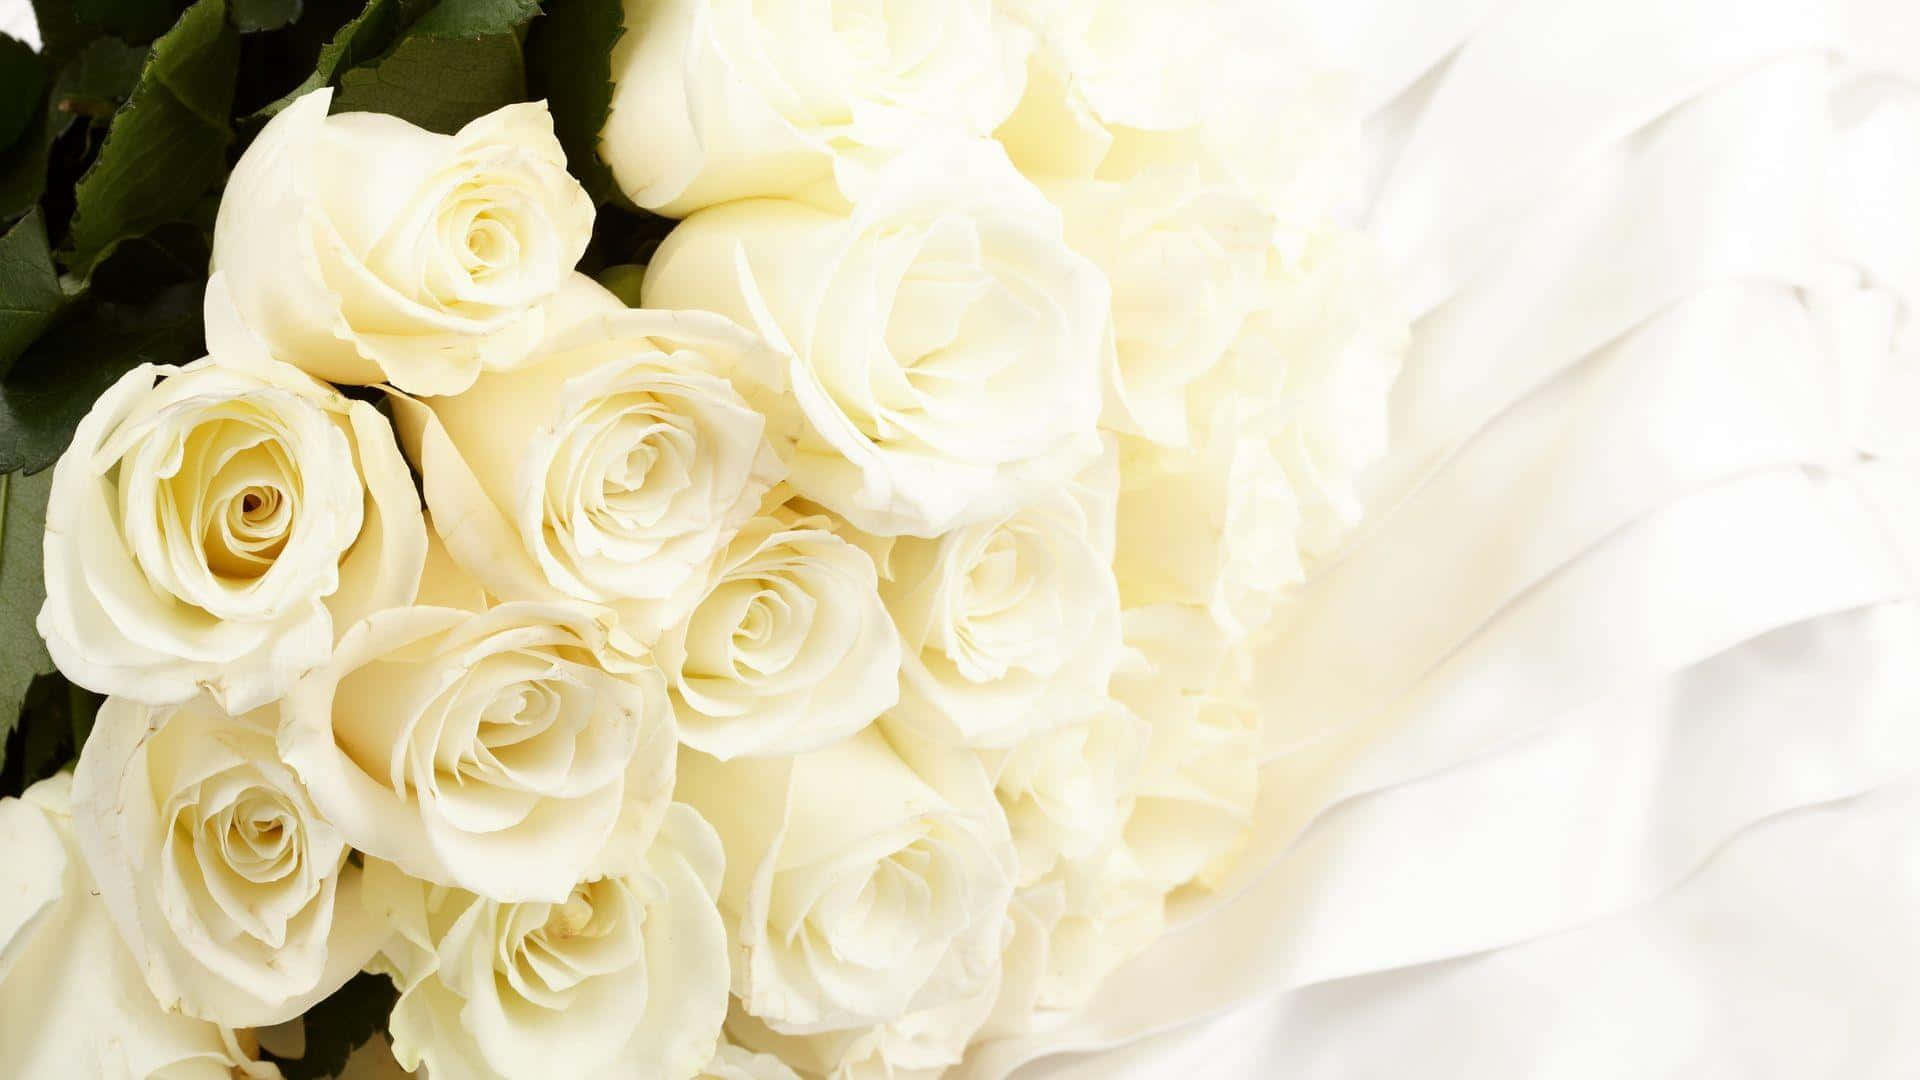 Behold The Beauty of White Roses